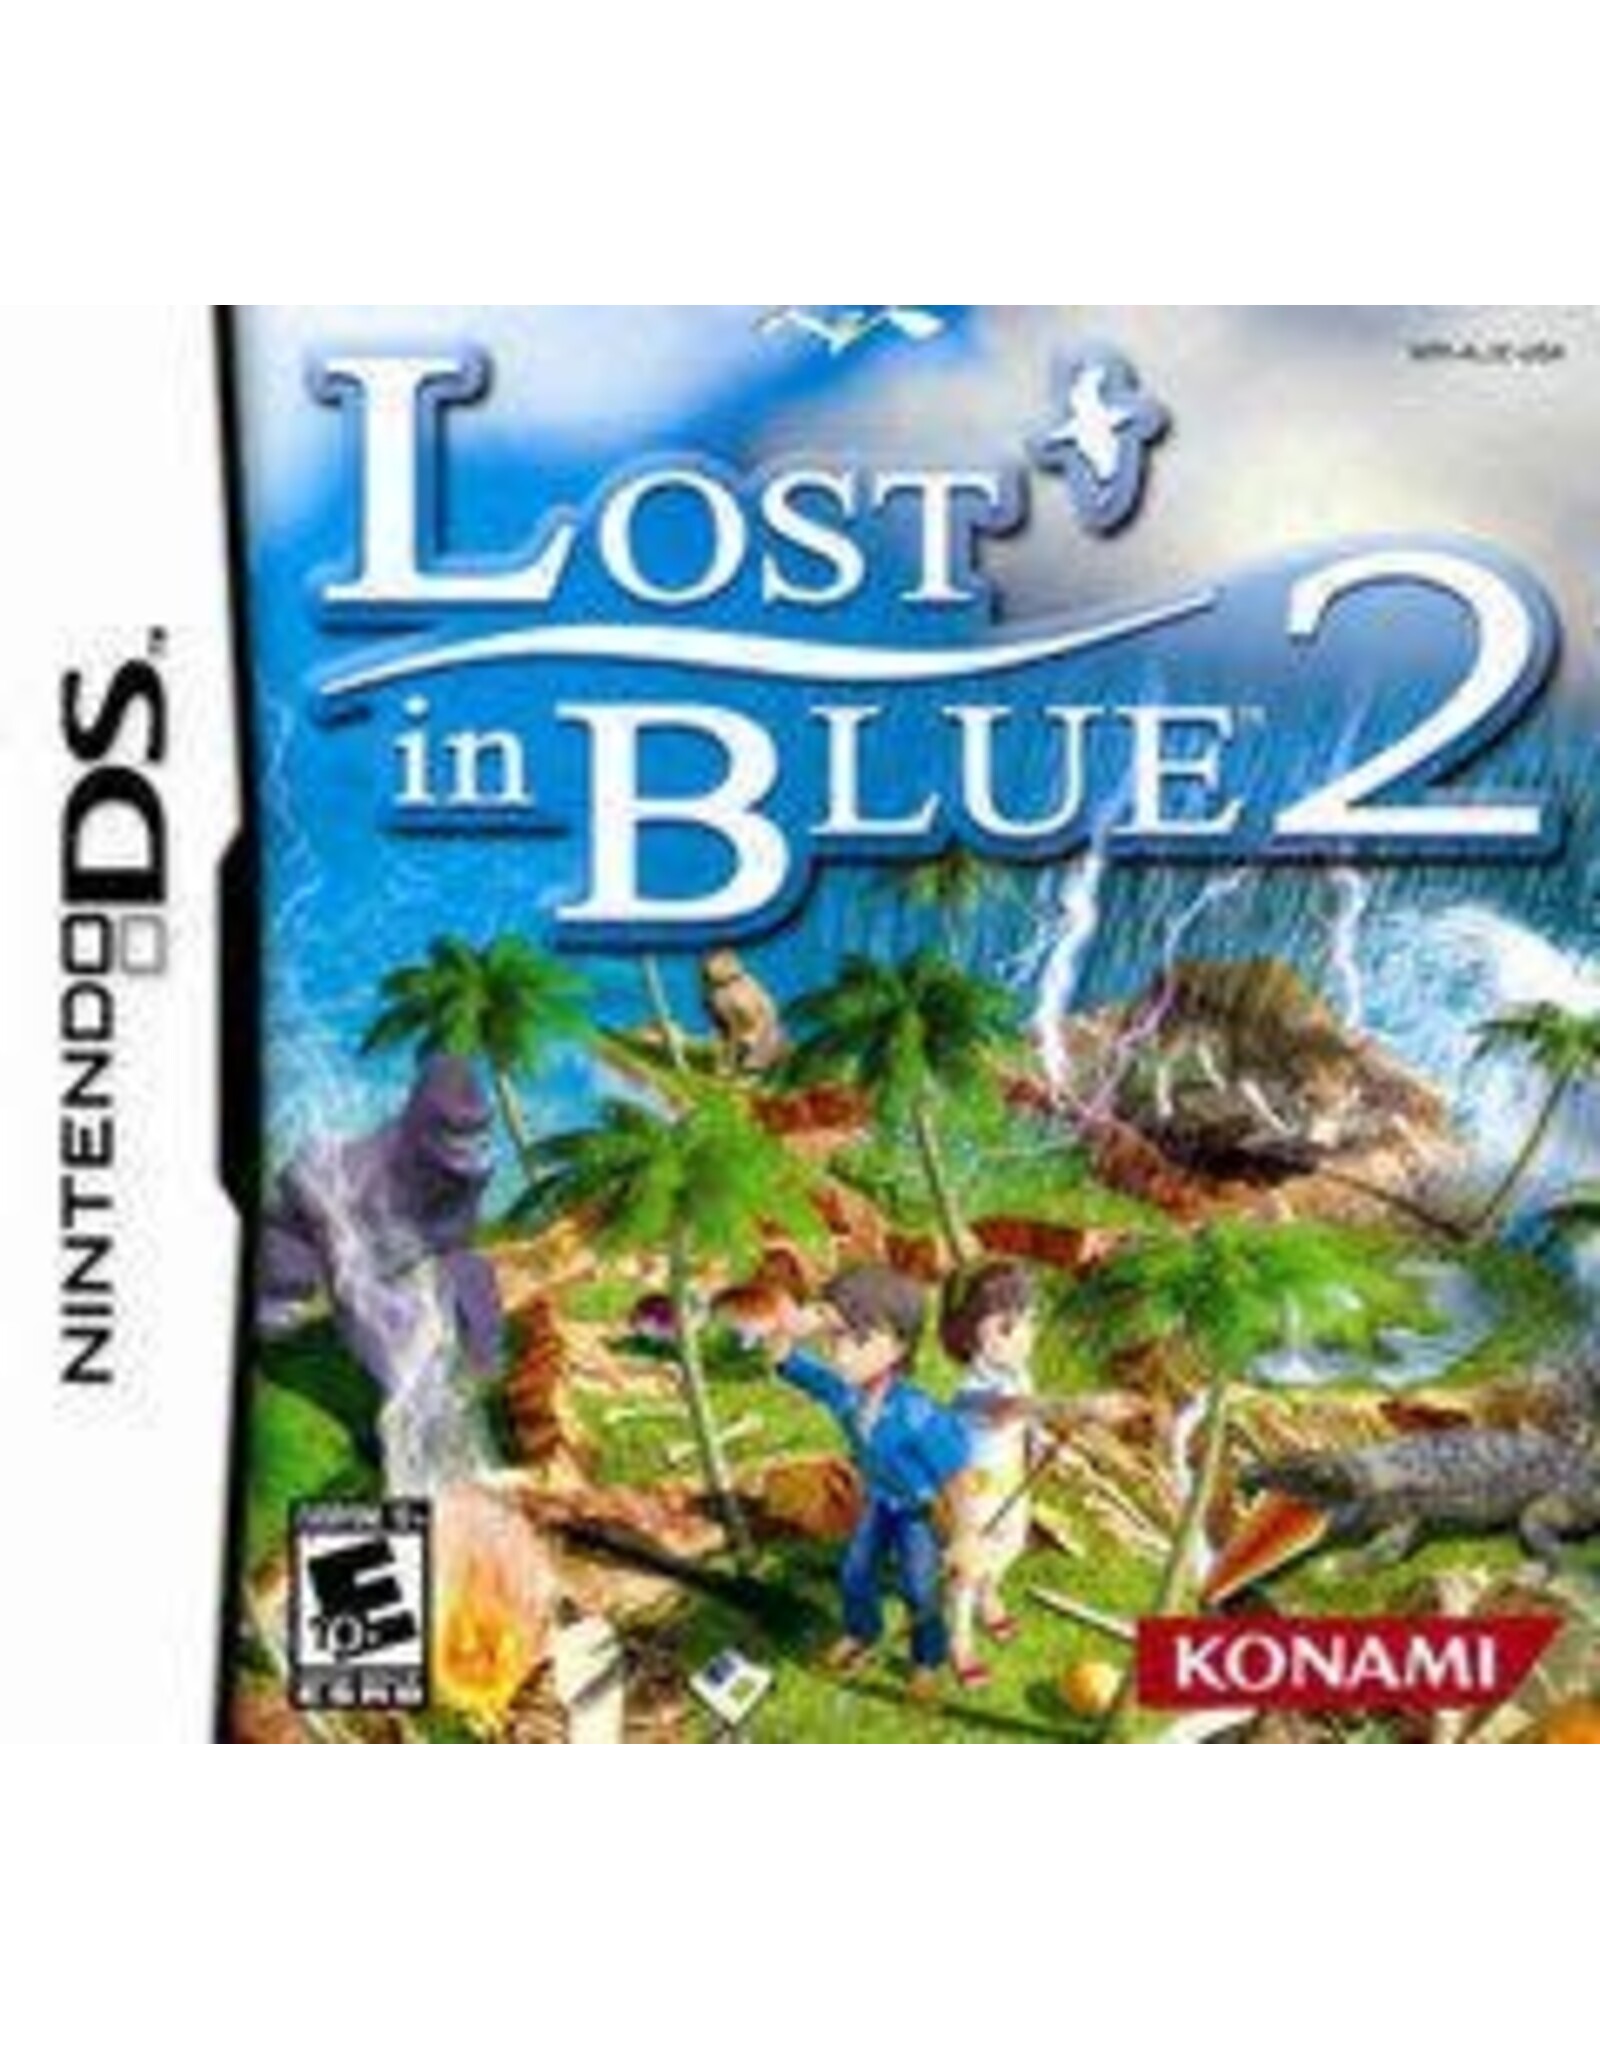 Nintendo DS Lost in Blue 2 (Cart Only)